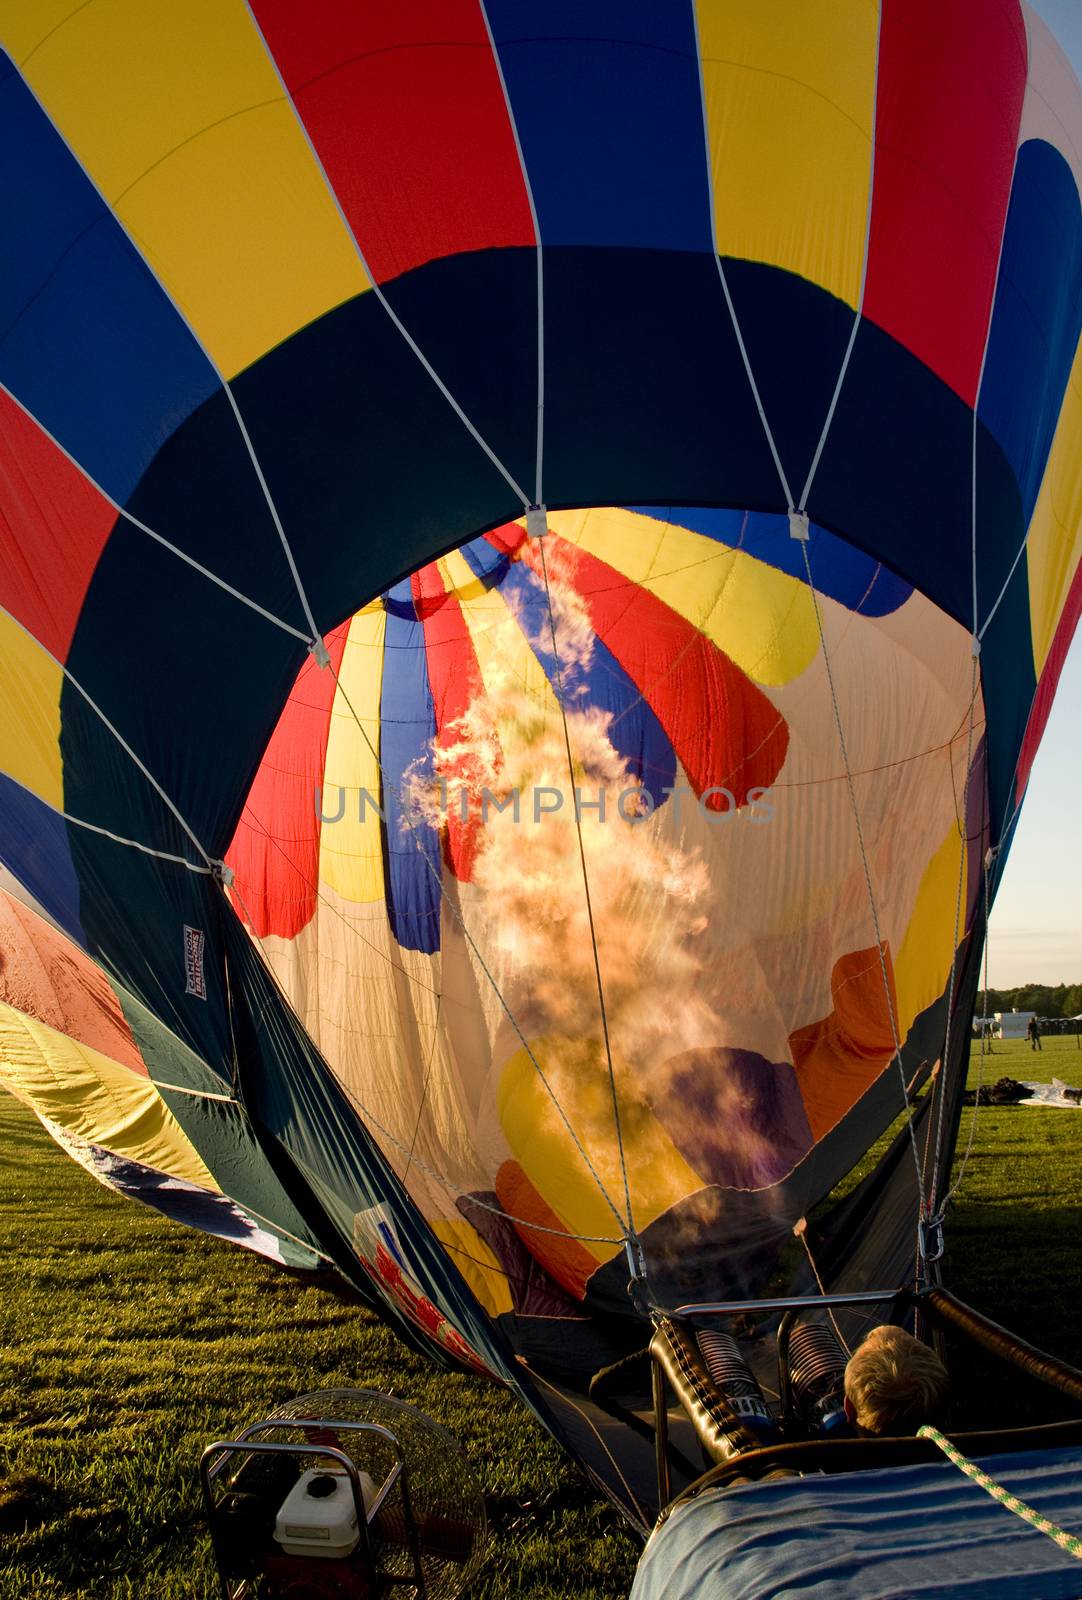 Hot air balloon being inflated in preparation for flight with flames shooting into the envelope.